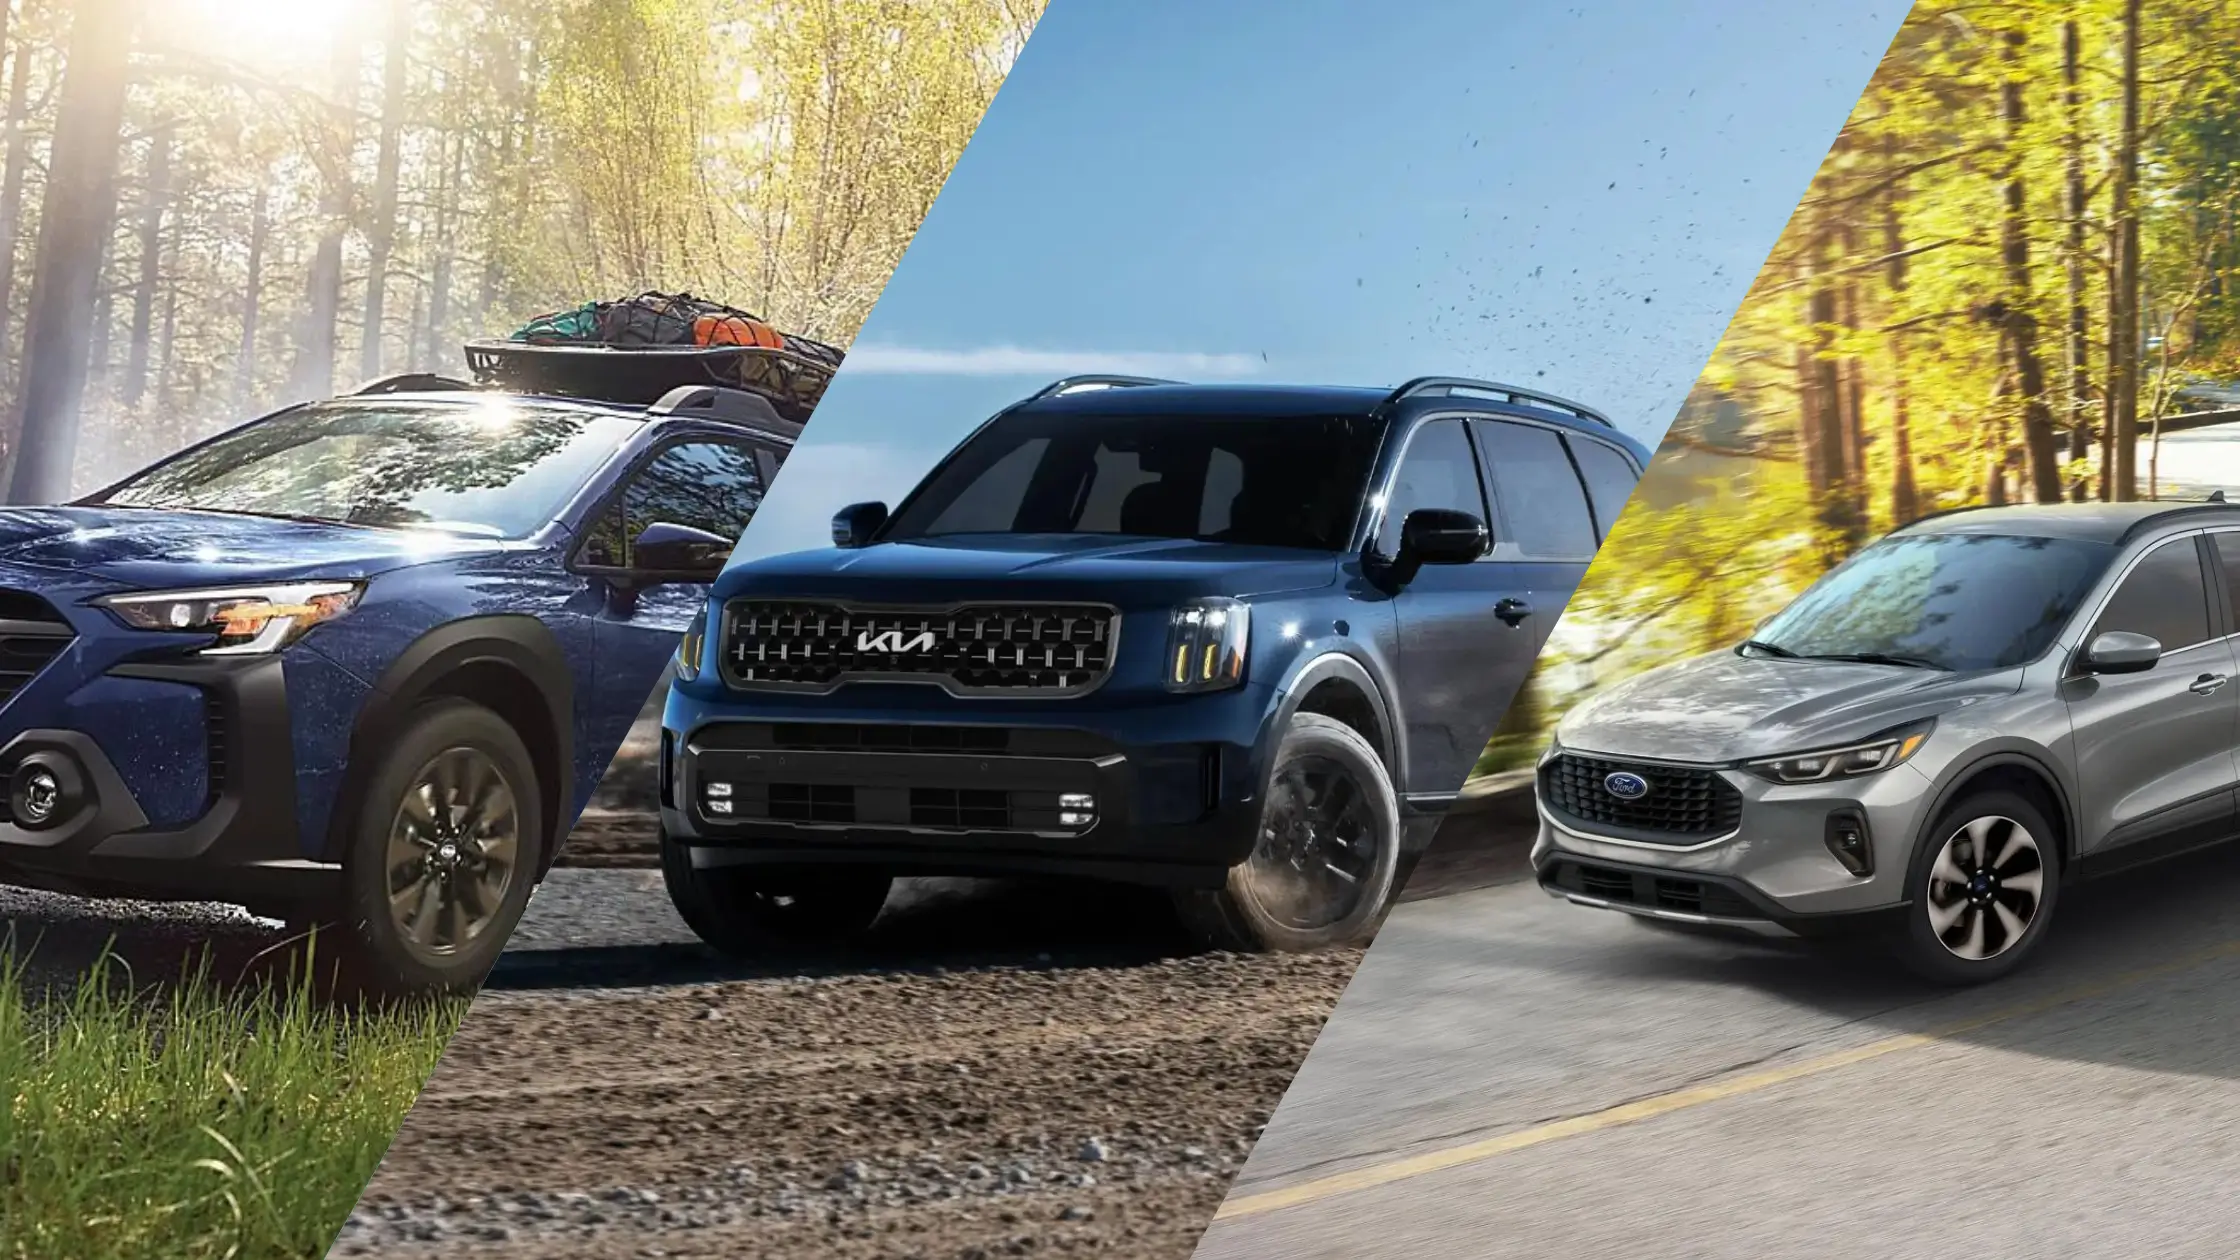 A collage featuring three SUVs driving in different outdoor settings: a blue Subaru Outback driving through a forest with camping gear on the roof, a blue Kia Telluride driving off-road kicking up dirt, and a silver Ford Escape towing a boat on a scenic road surrounded by trees.